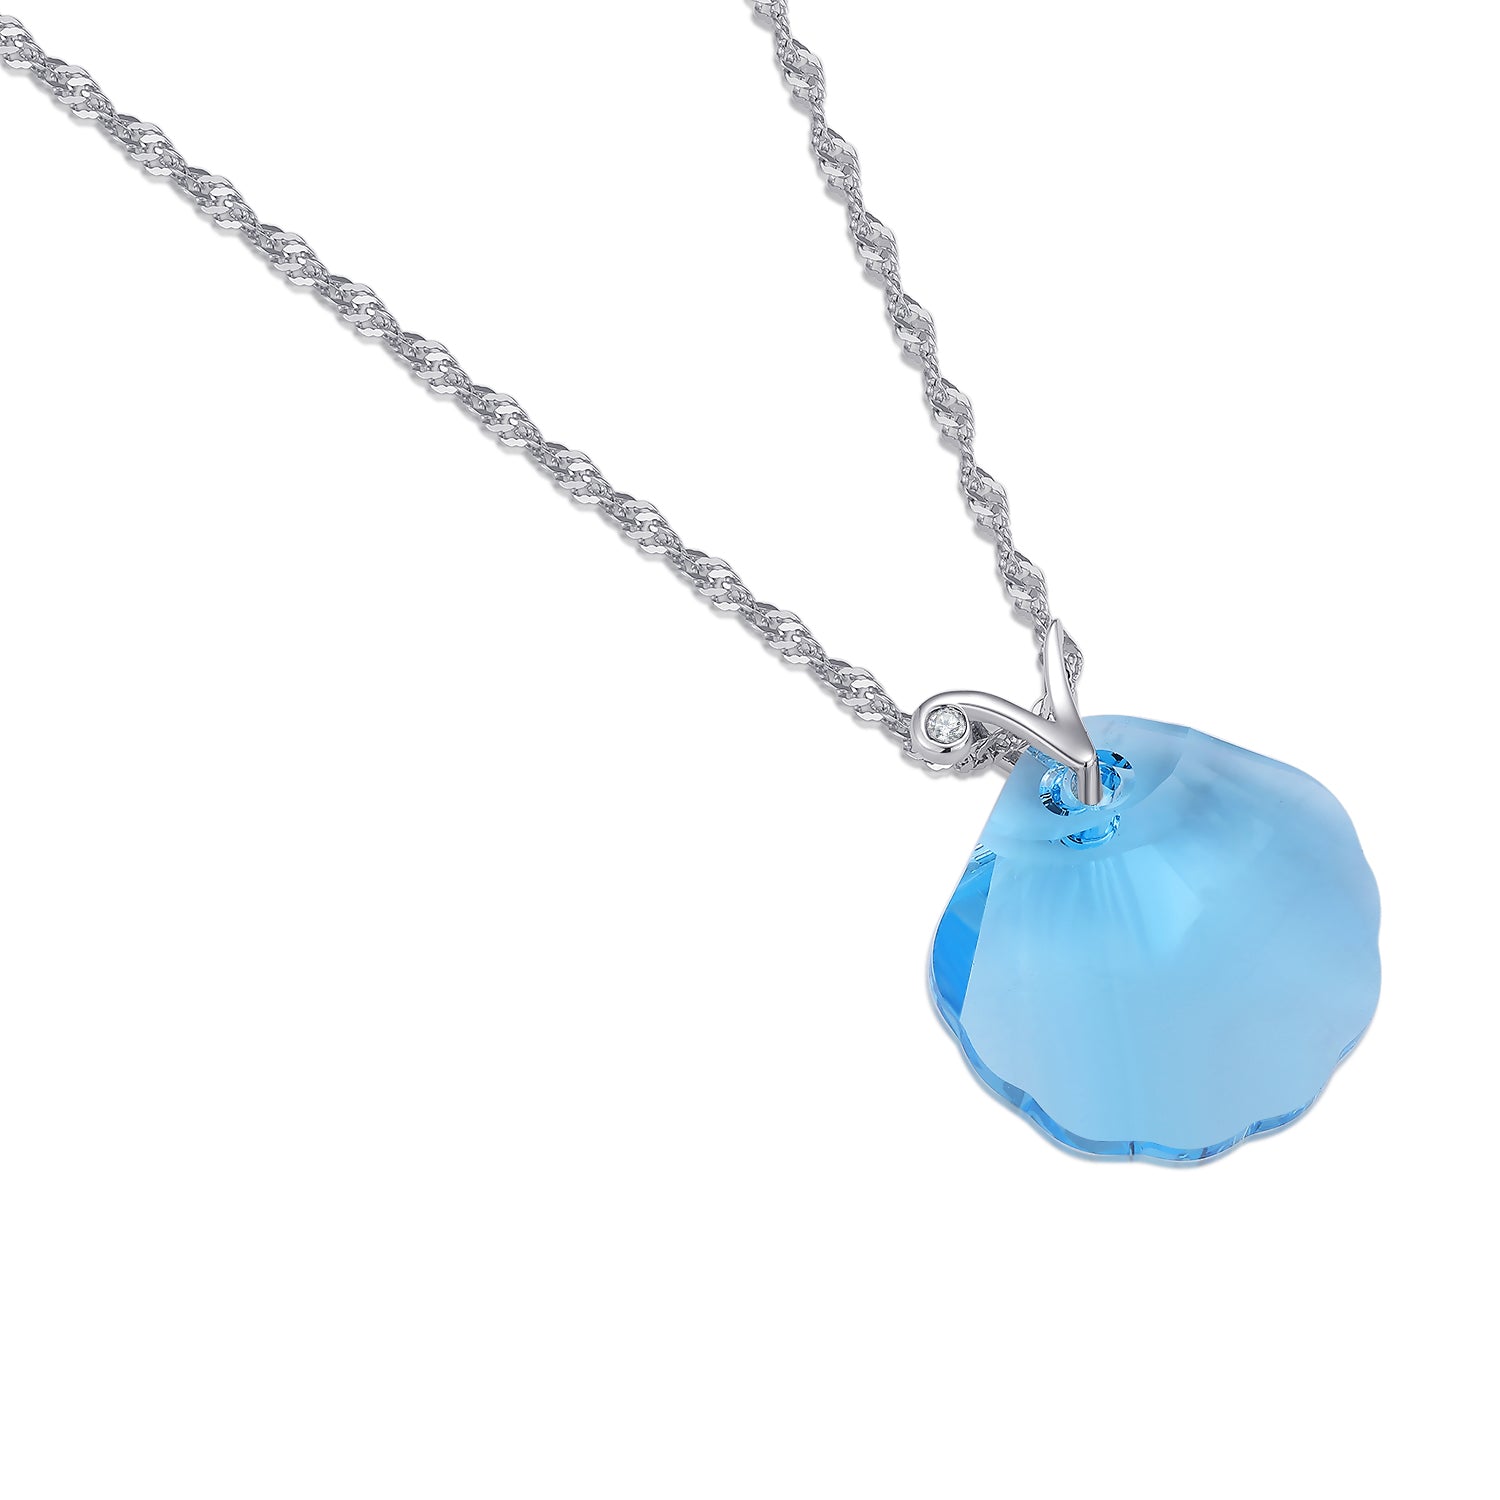 sterling silver shell pendant necklace adopts the top Austrian crystal